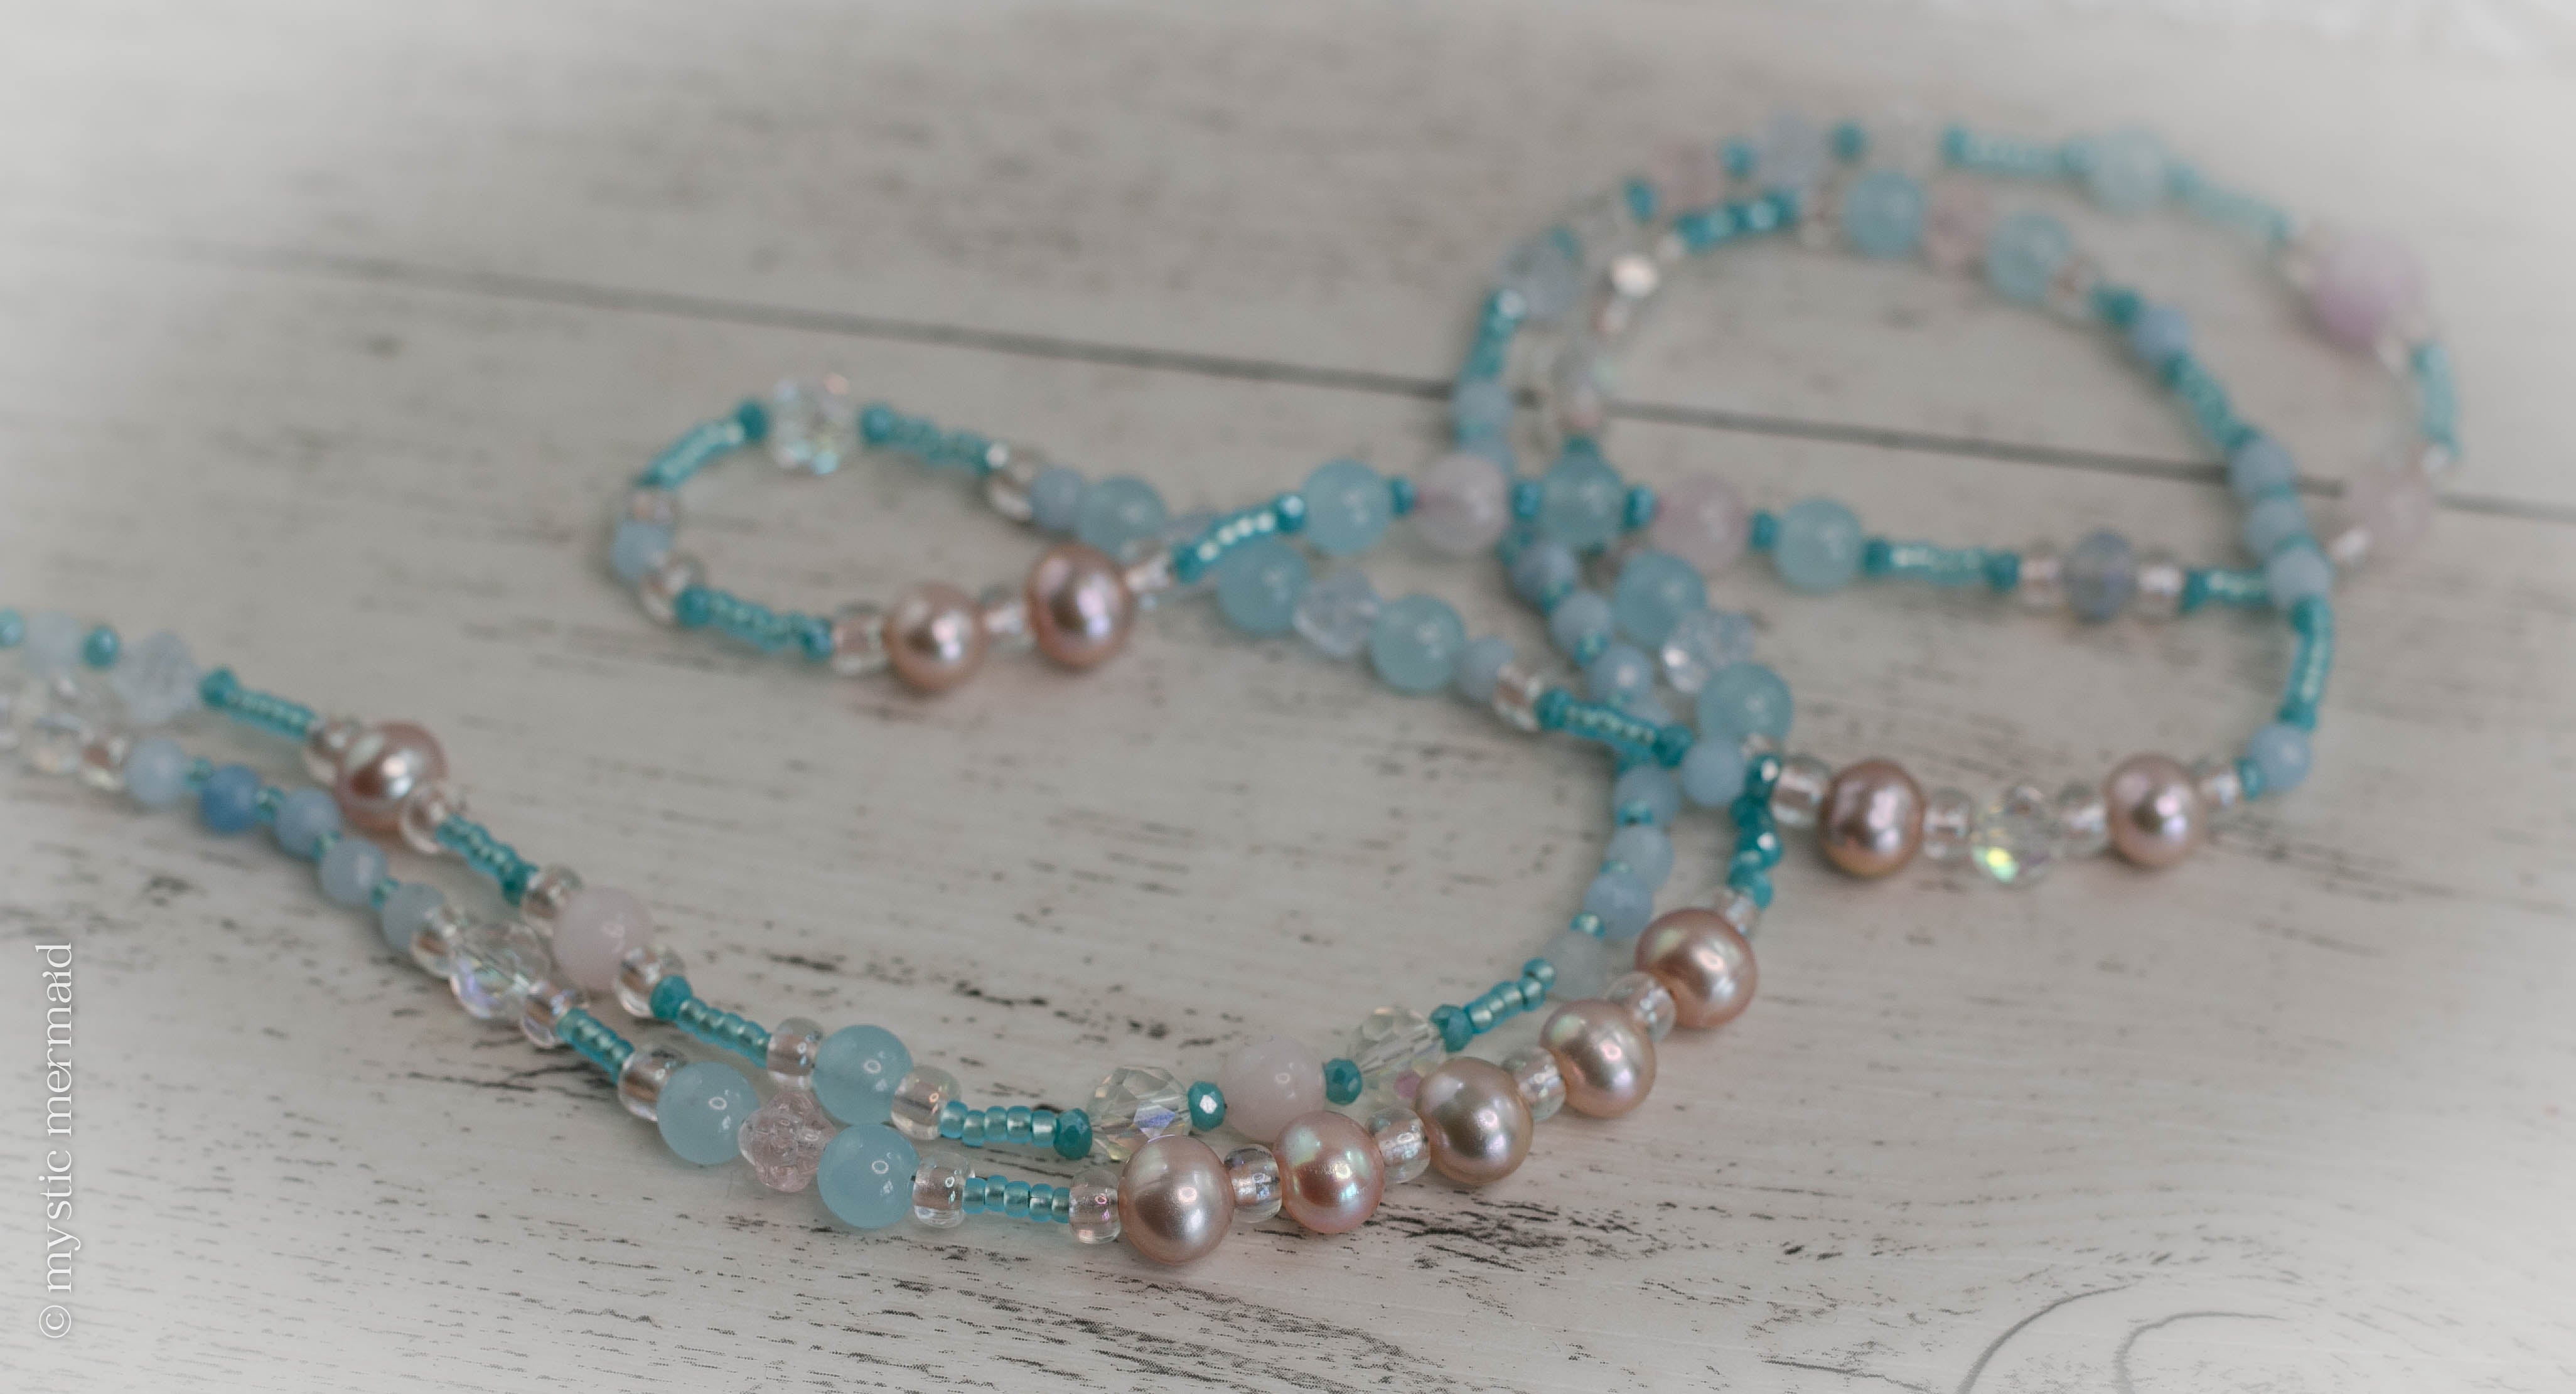 On Wings and Prayers - Angel pendant feature necklace with Aquamarine, Rose Quartz, Genuine Pearls and Kunzite